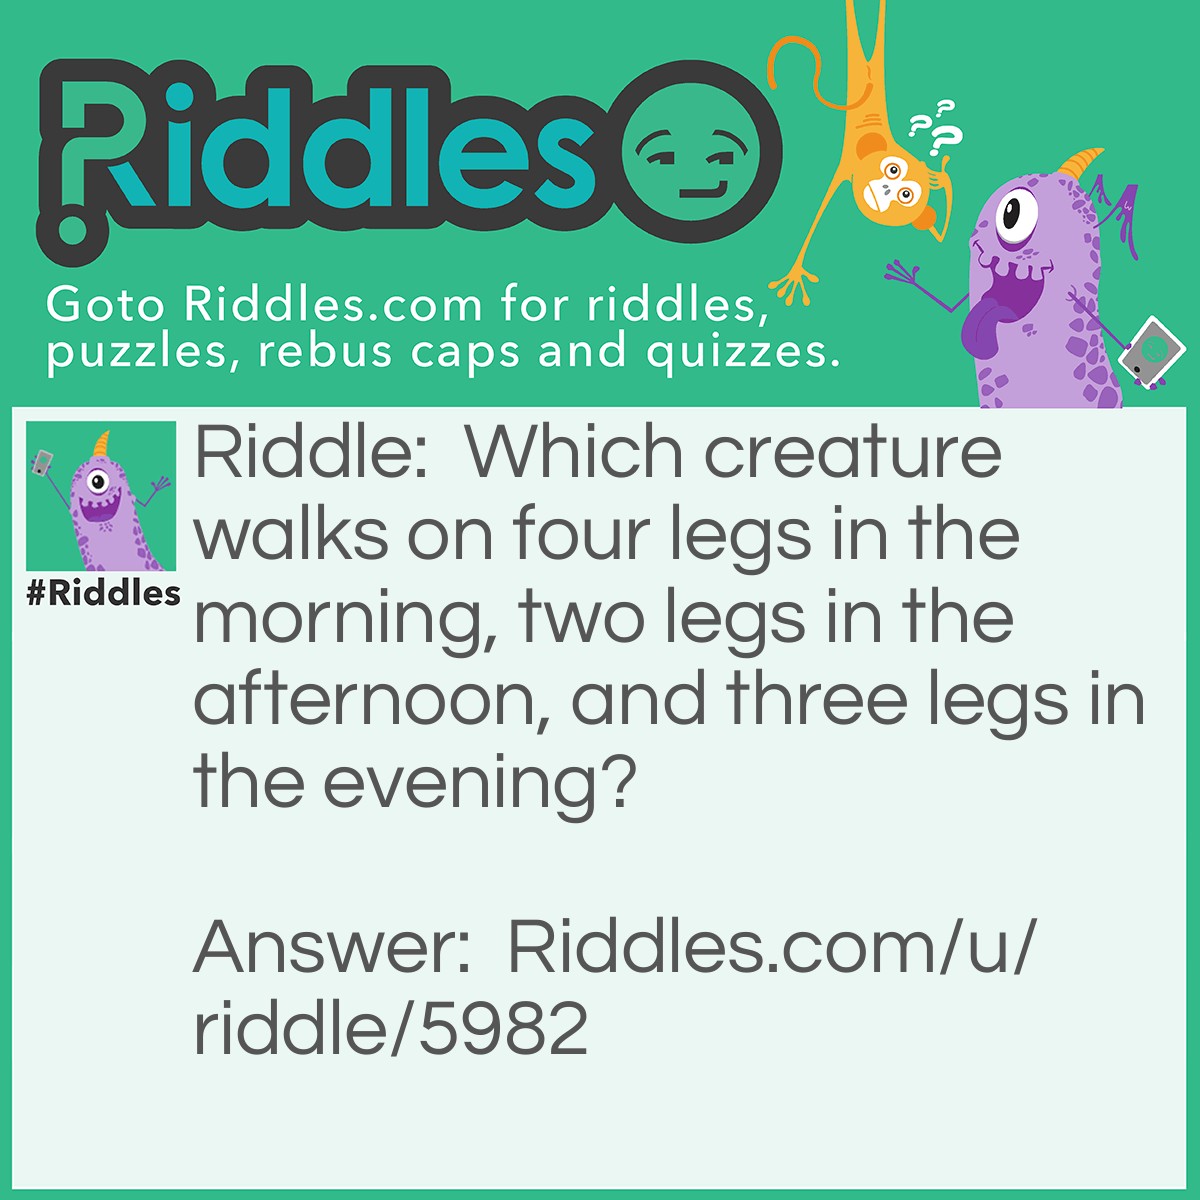 Riddle: Which creature walks on four legs in the morning, two legs in the afternoon, and three legs in the evening? Answer: Man. He crawls on all fours as a baby, then walks on two feet as an adult, and then walks with a cane as an old man.